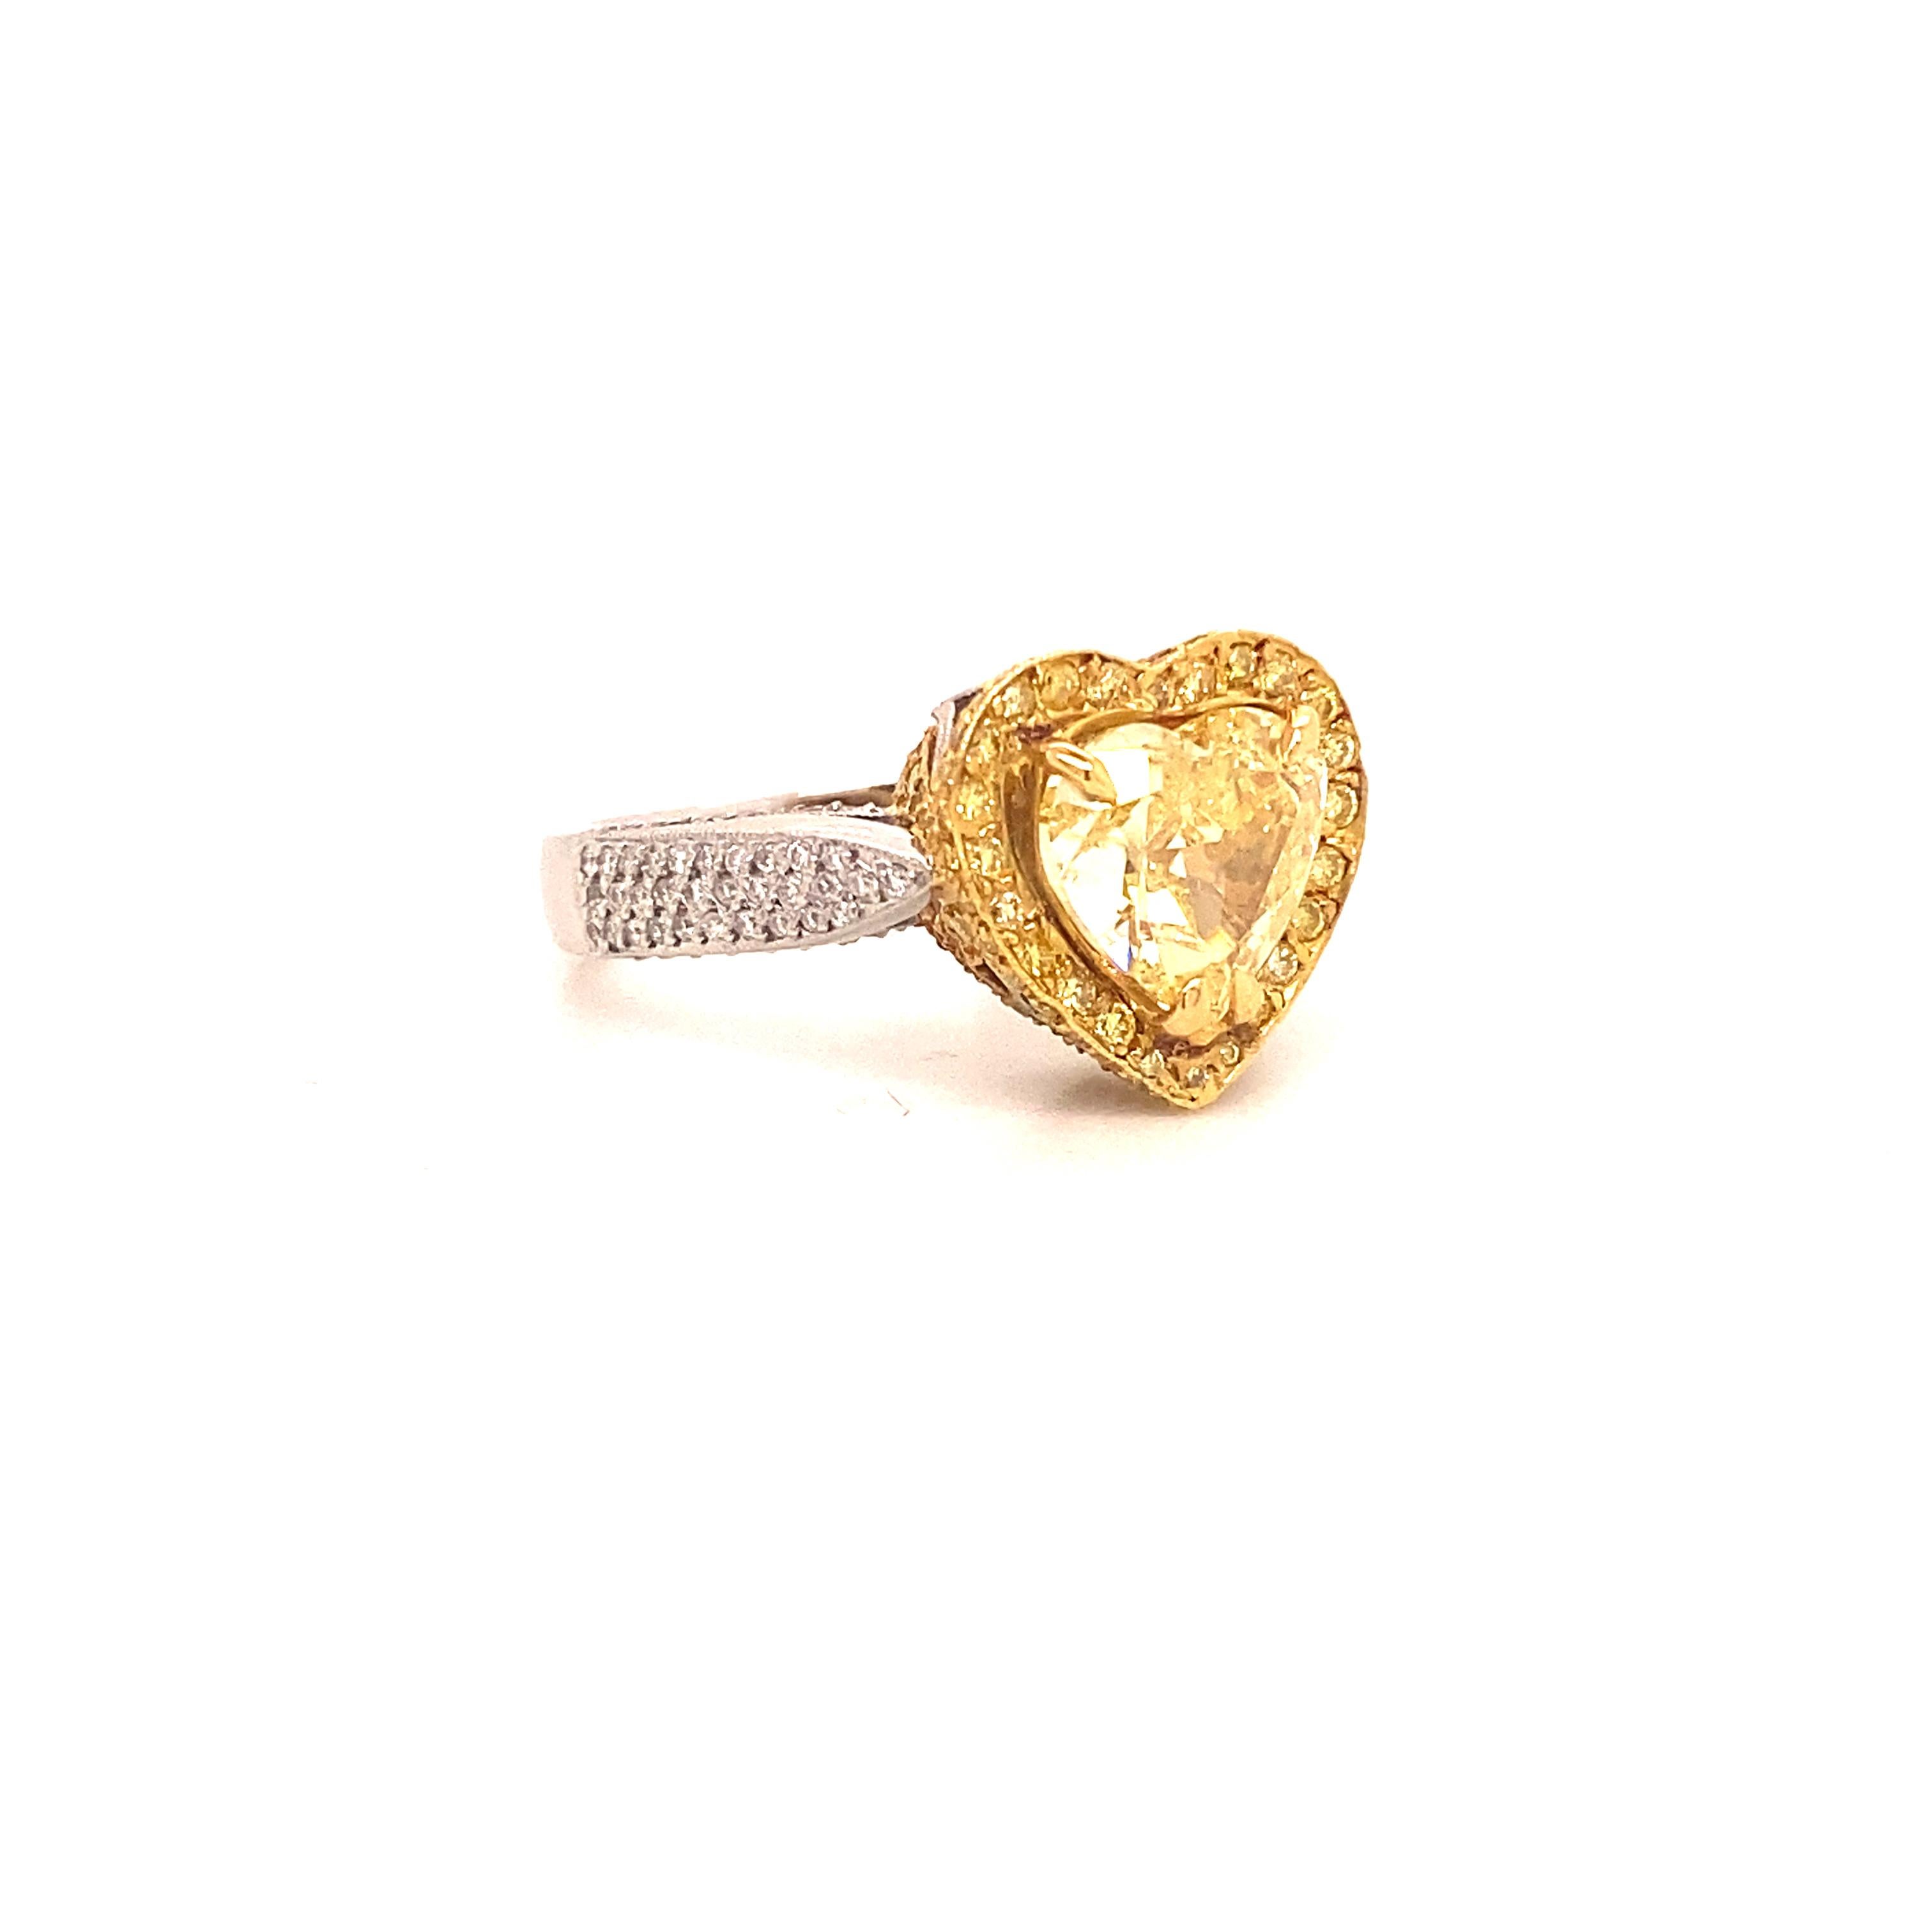 Fancy Intense Yellow Diamond Heart Shape Ring

This ring features a unique natural fancy intense yellow diamond in its center. It is GIA certified as a fancy intense yellow diamond weighing 2.16 carats. It is surrounded by the seamless color of